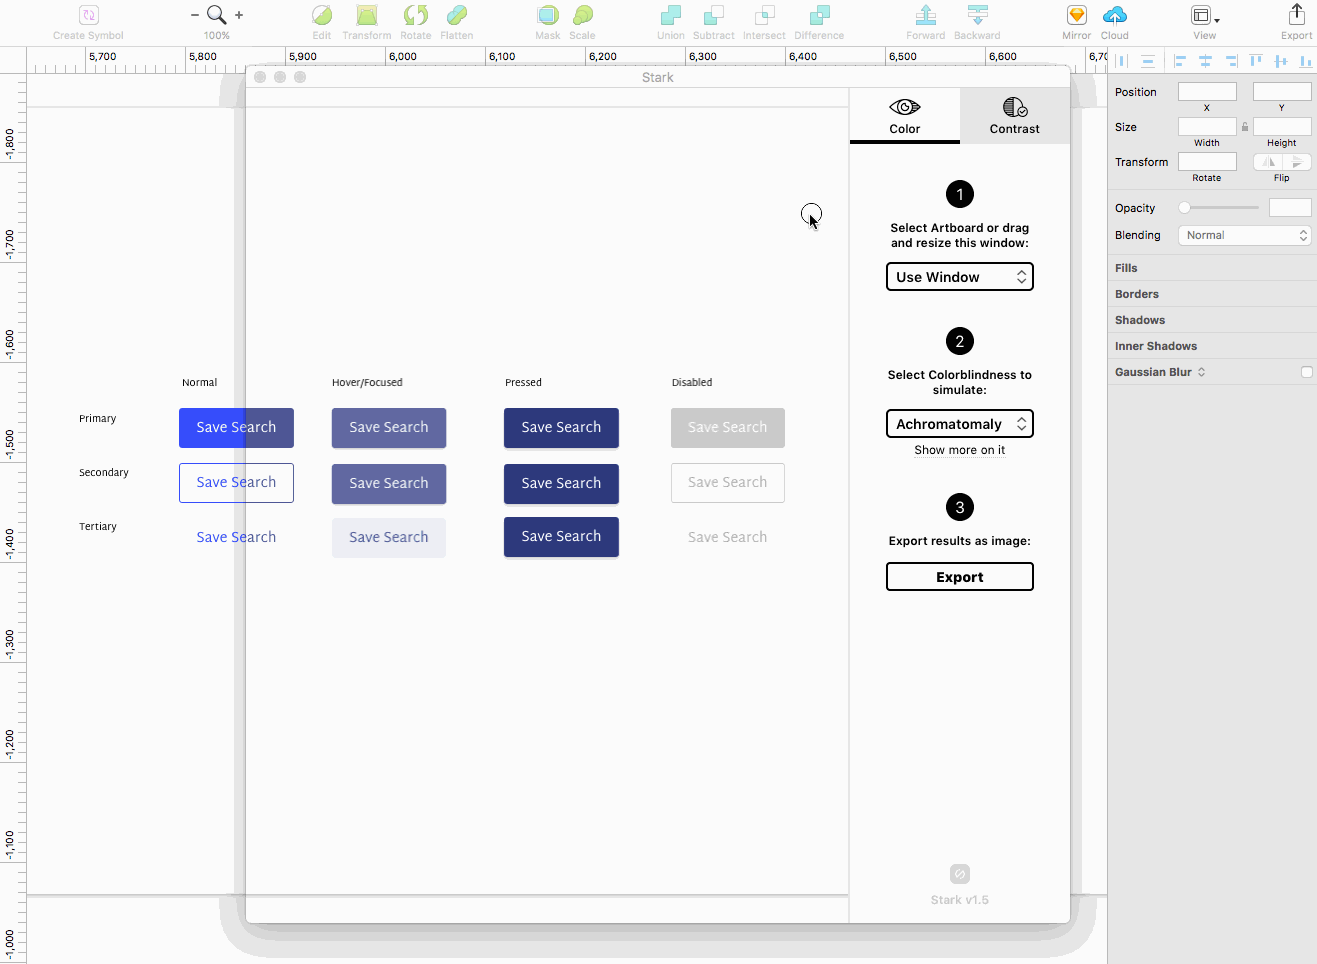 Select two layer in your Sketch file to compare their contrast and readability levels